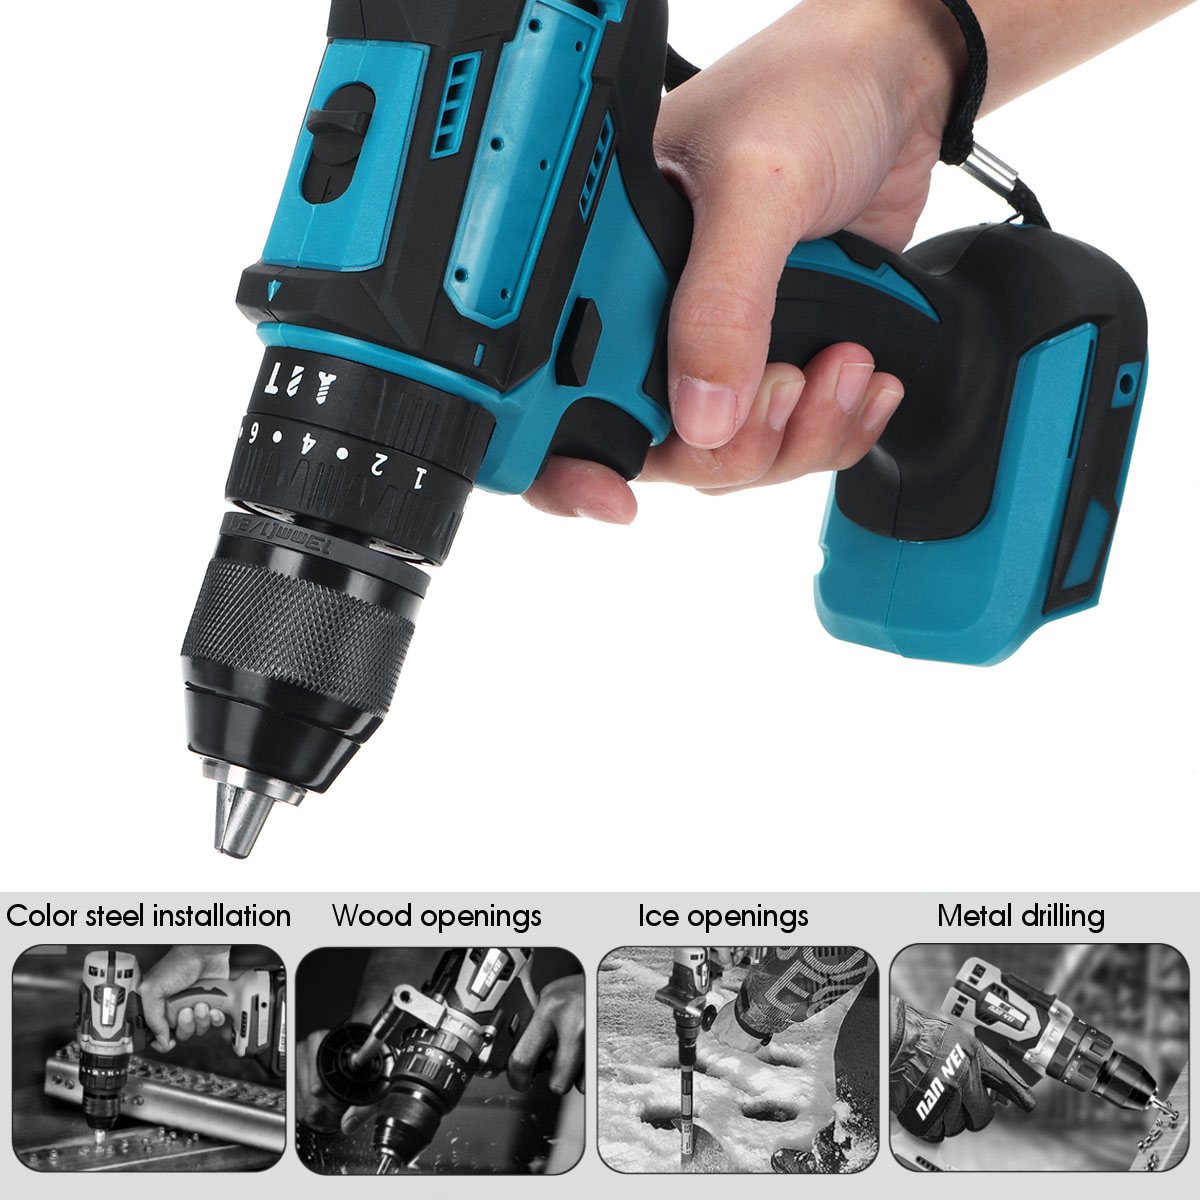 Drillpro-10mm-Chuck-Impact-Drill-350Nm-Cordless-Electric-Drill-For-Makita18V-Battery-4000RPM-LED-Lig-1642853-4